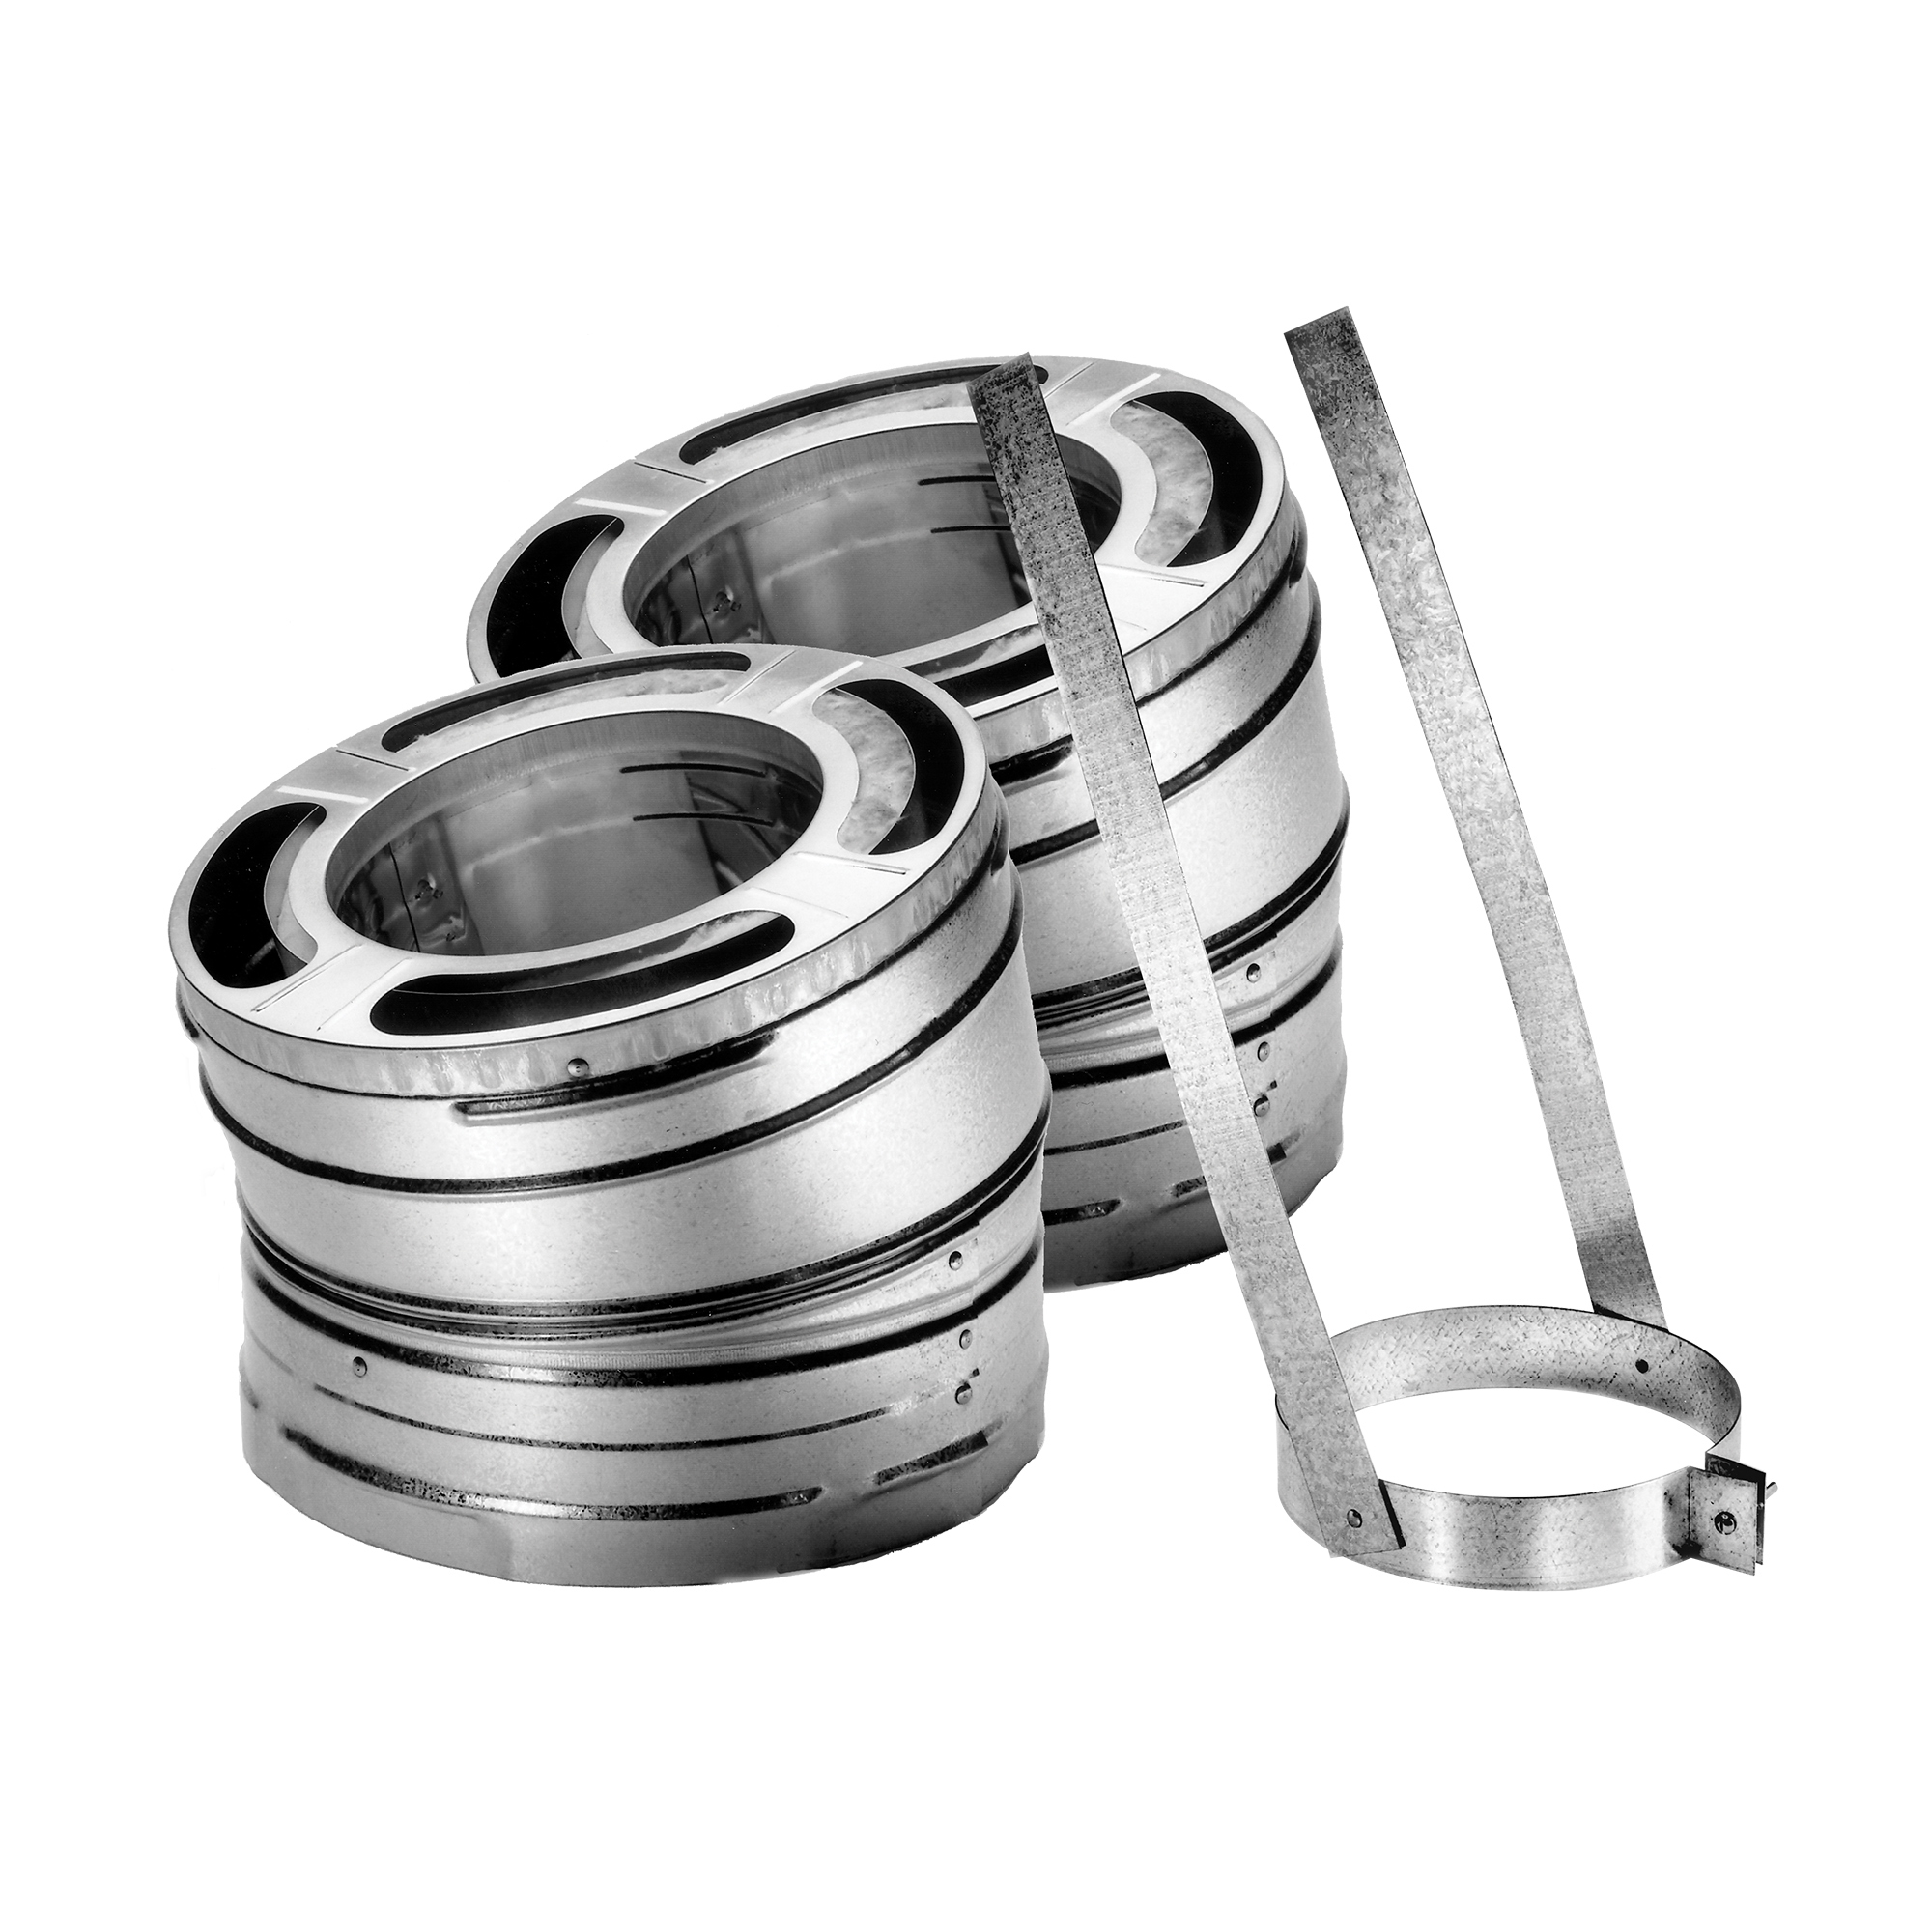 DuraVent, 8Inch Diameter 30Â° Kit 2 Elbows Strap, Included (qty.) 1 Material Galvanized Steel, Model 8DP-E30K